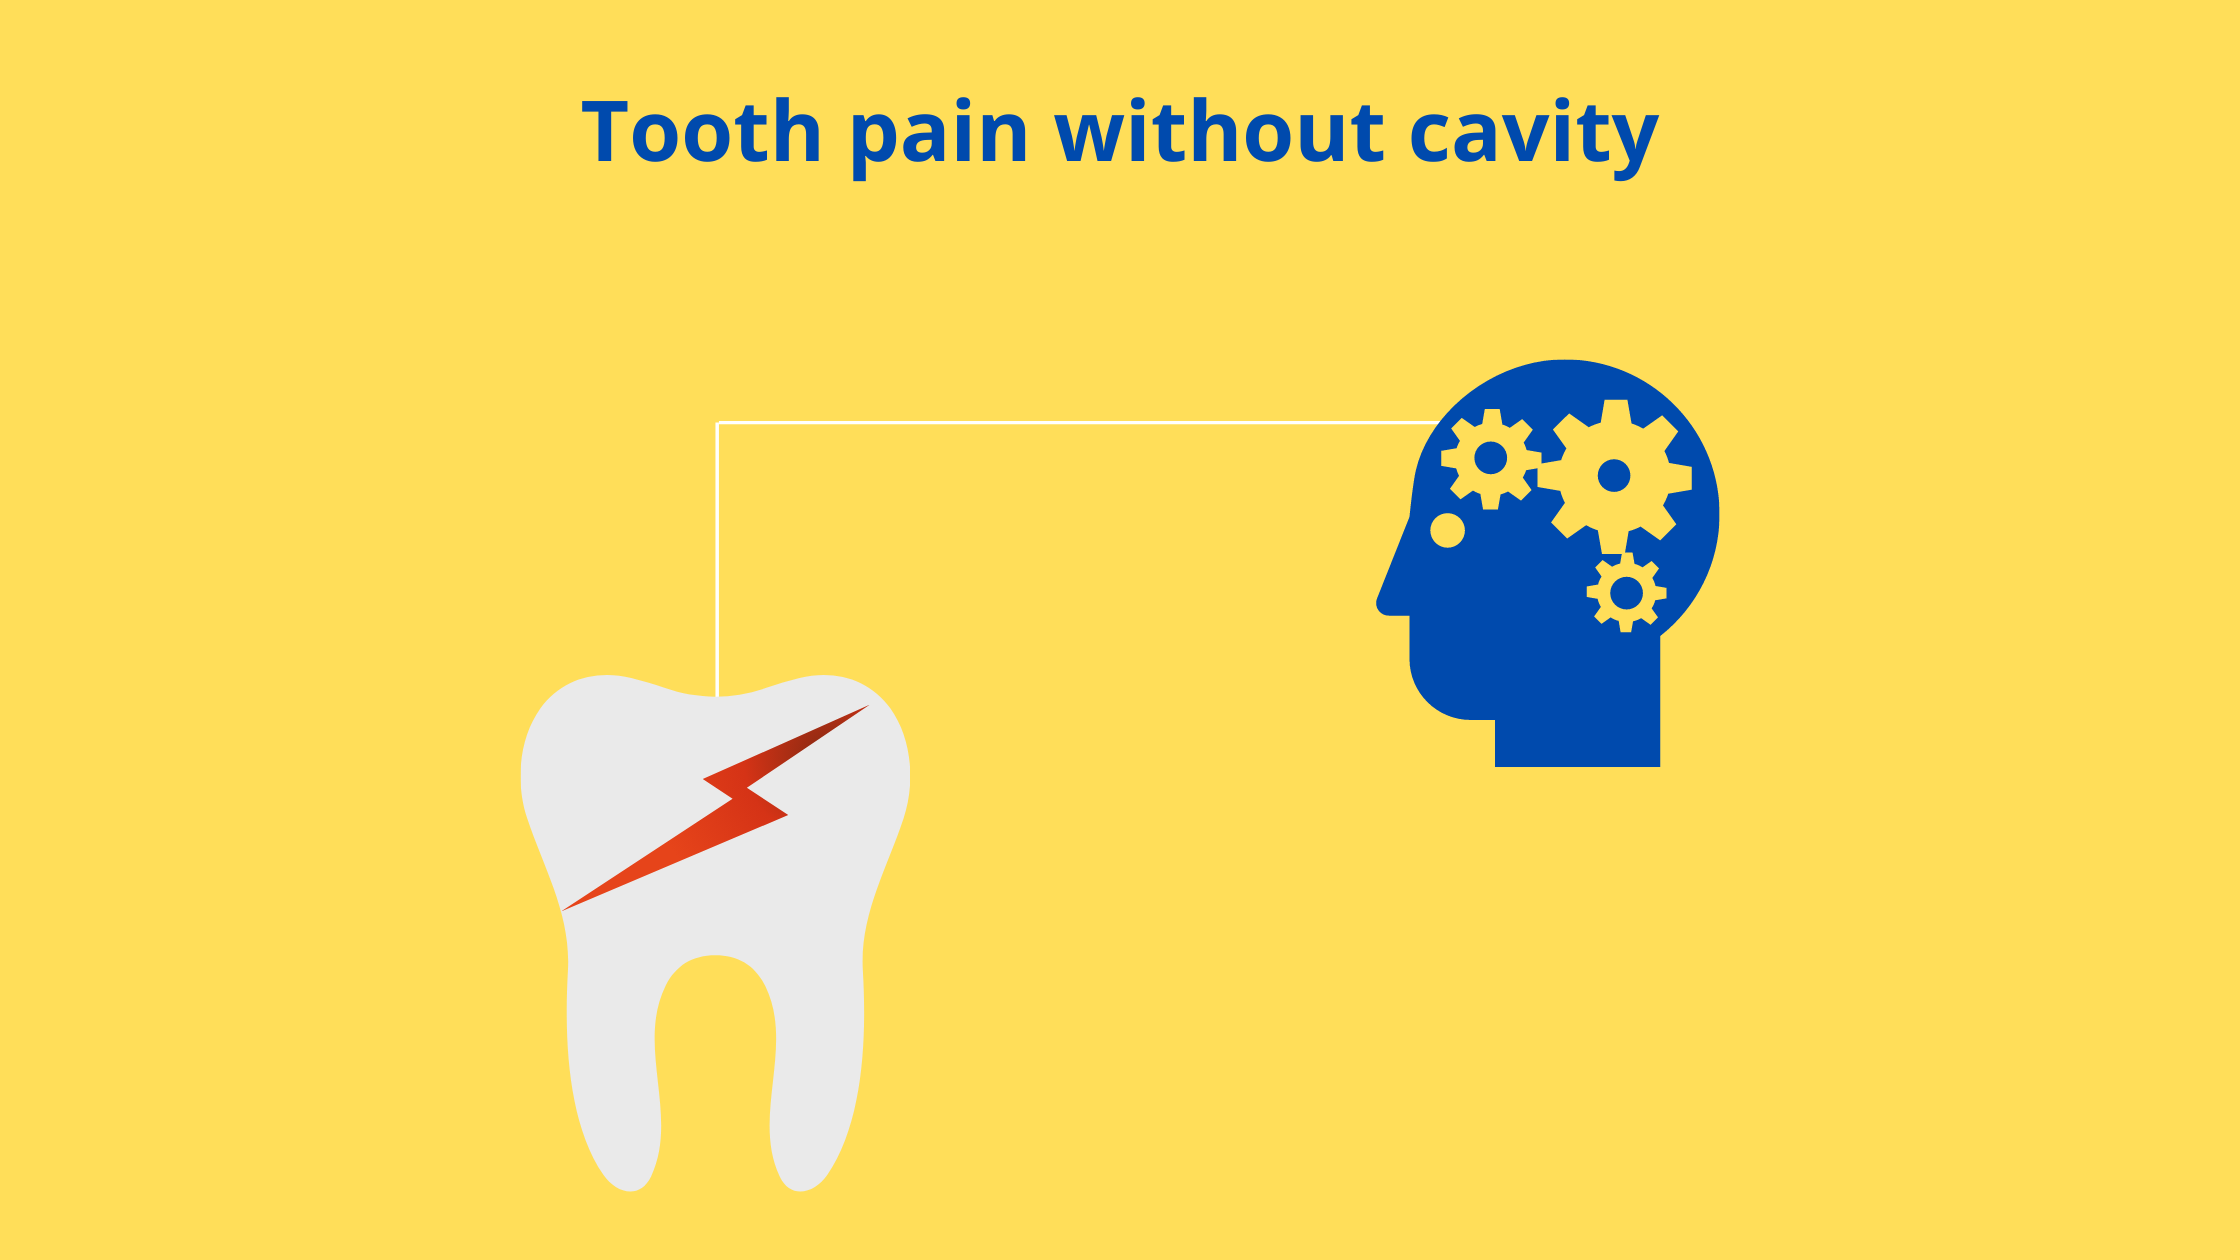 Tooth pain without cavity